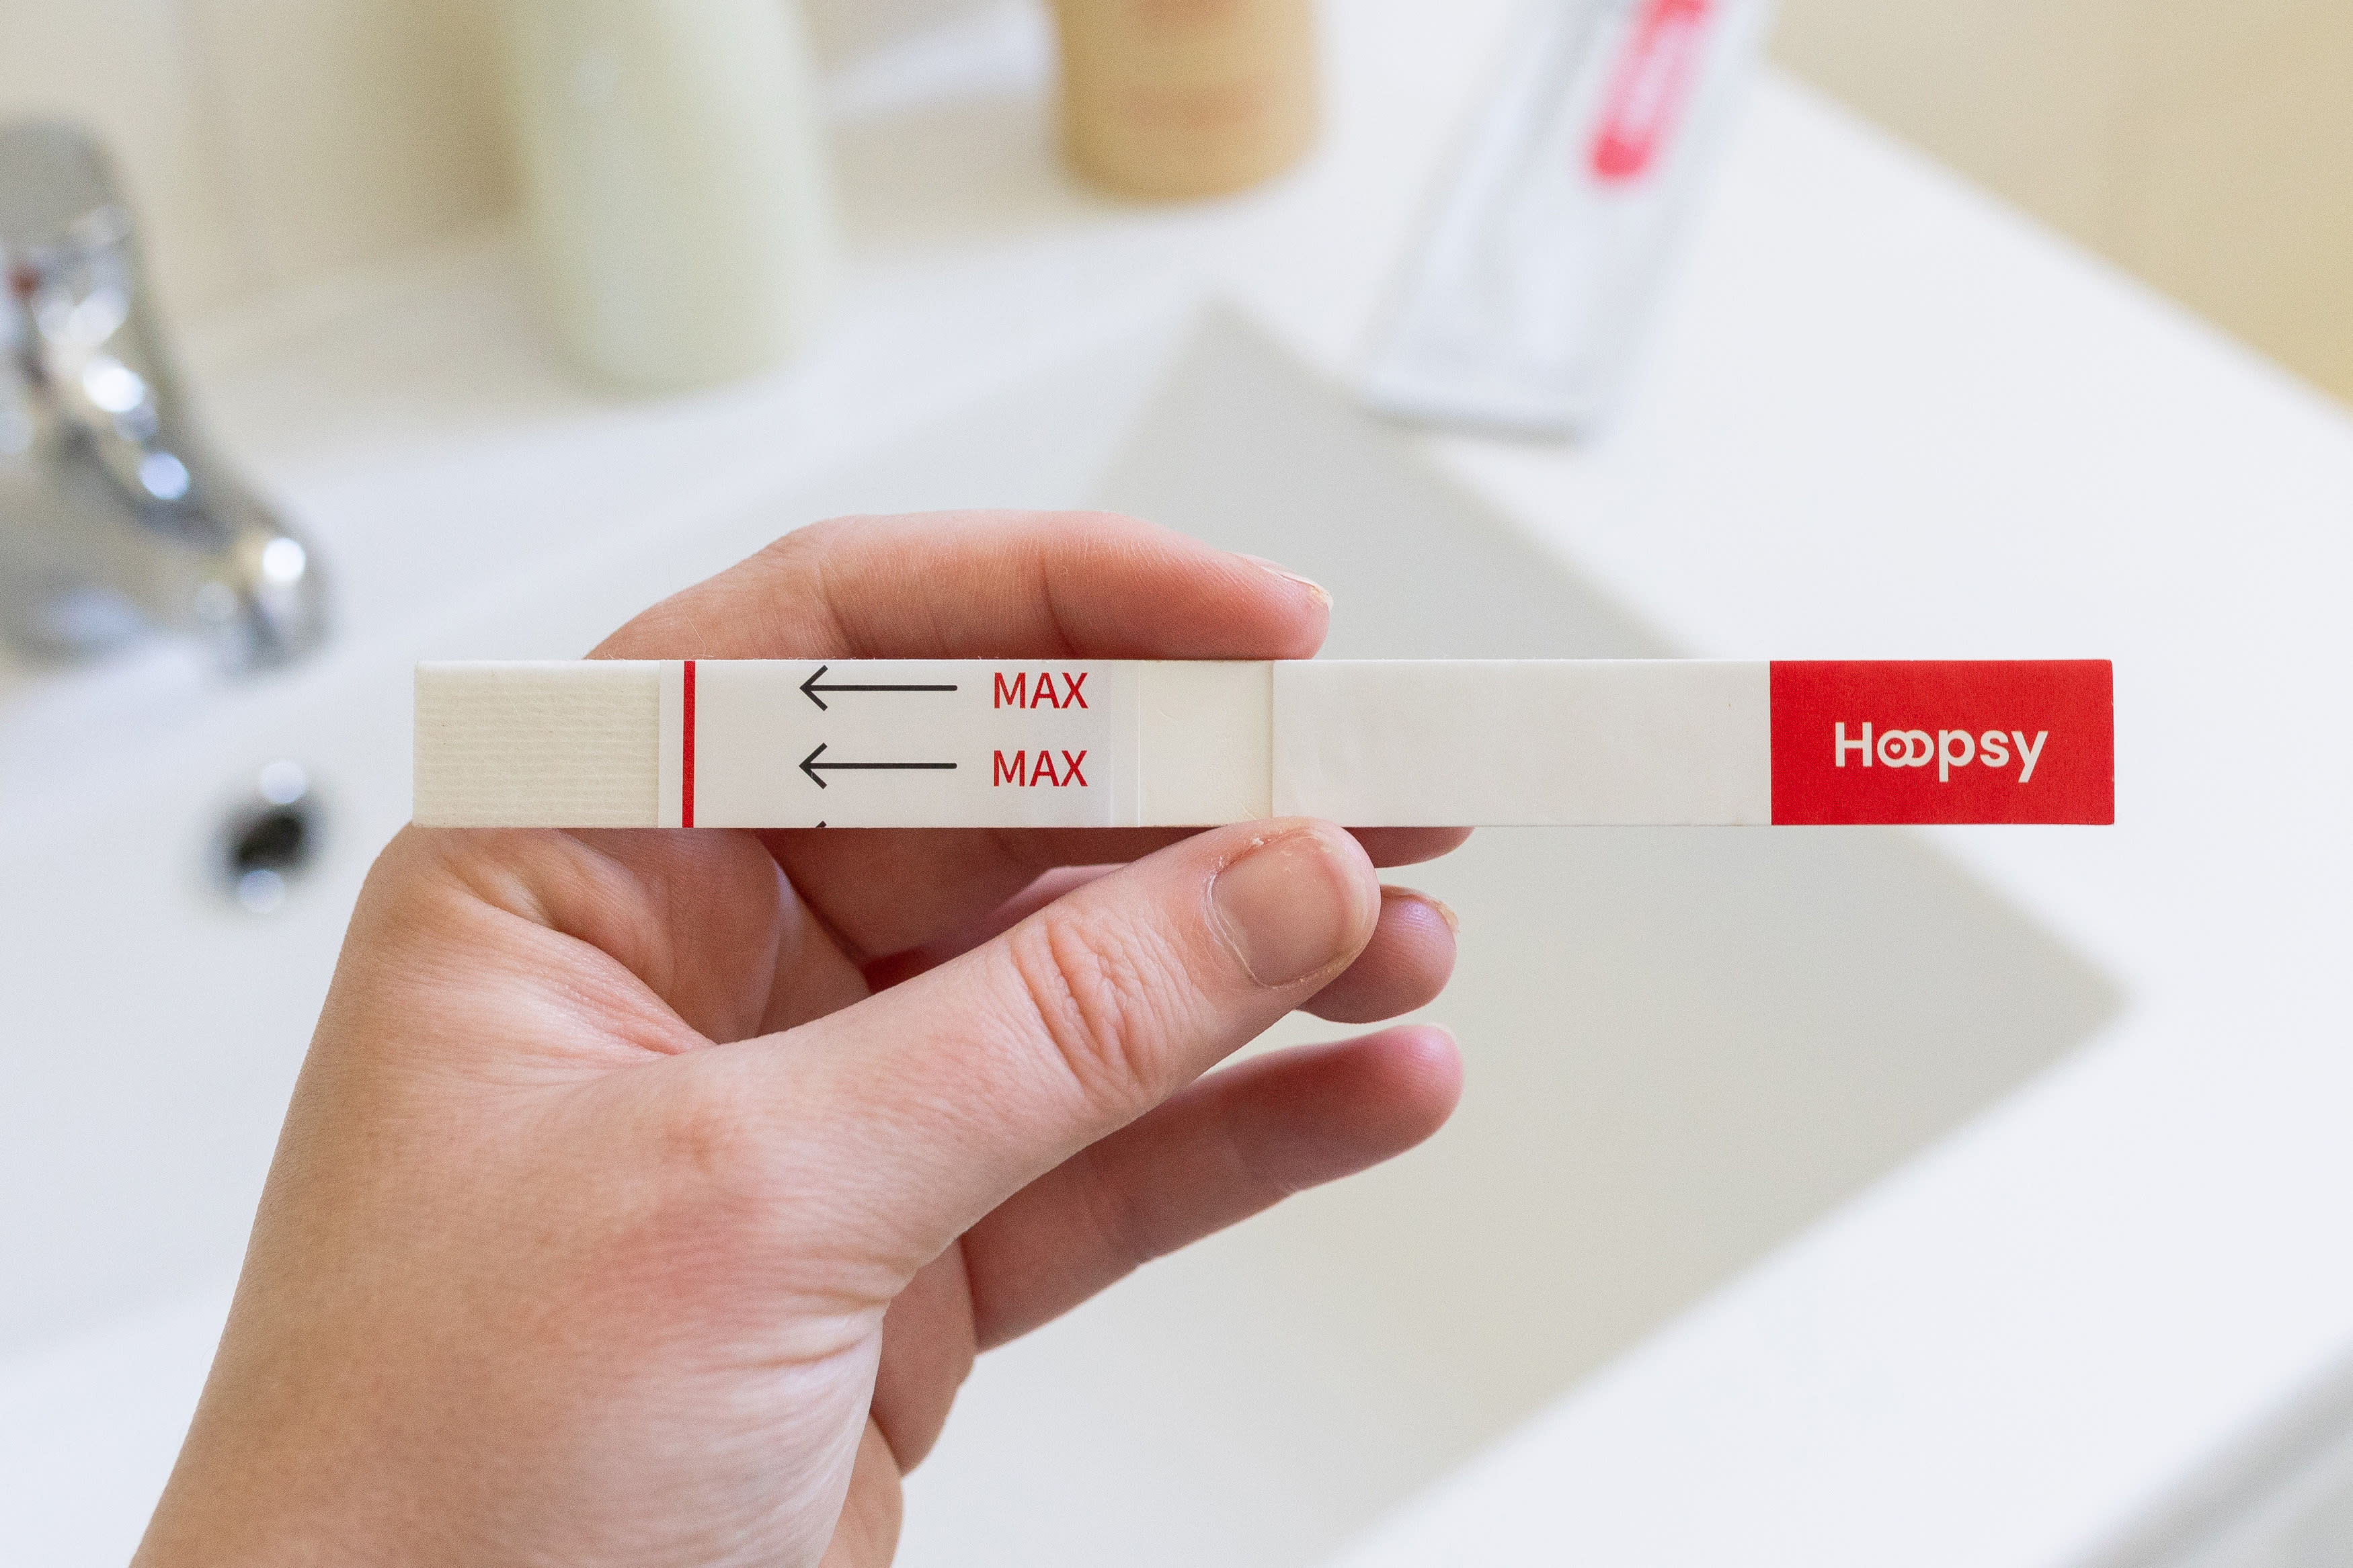 A white hand holding a pregnancy test strip over a sink. The test strip has a red Hoopsy logo at one end.